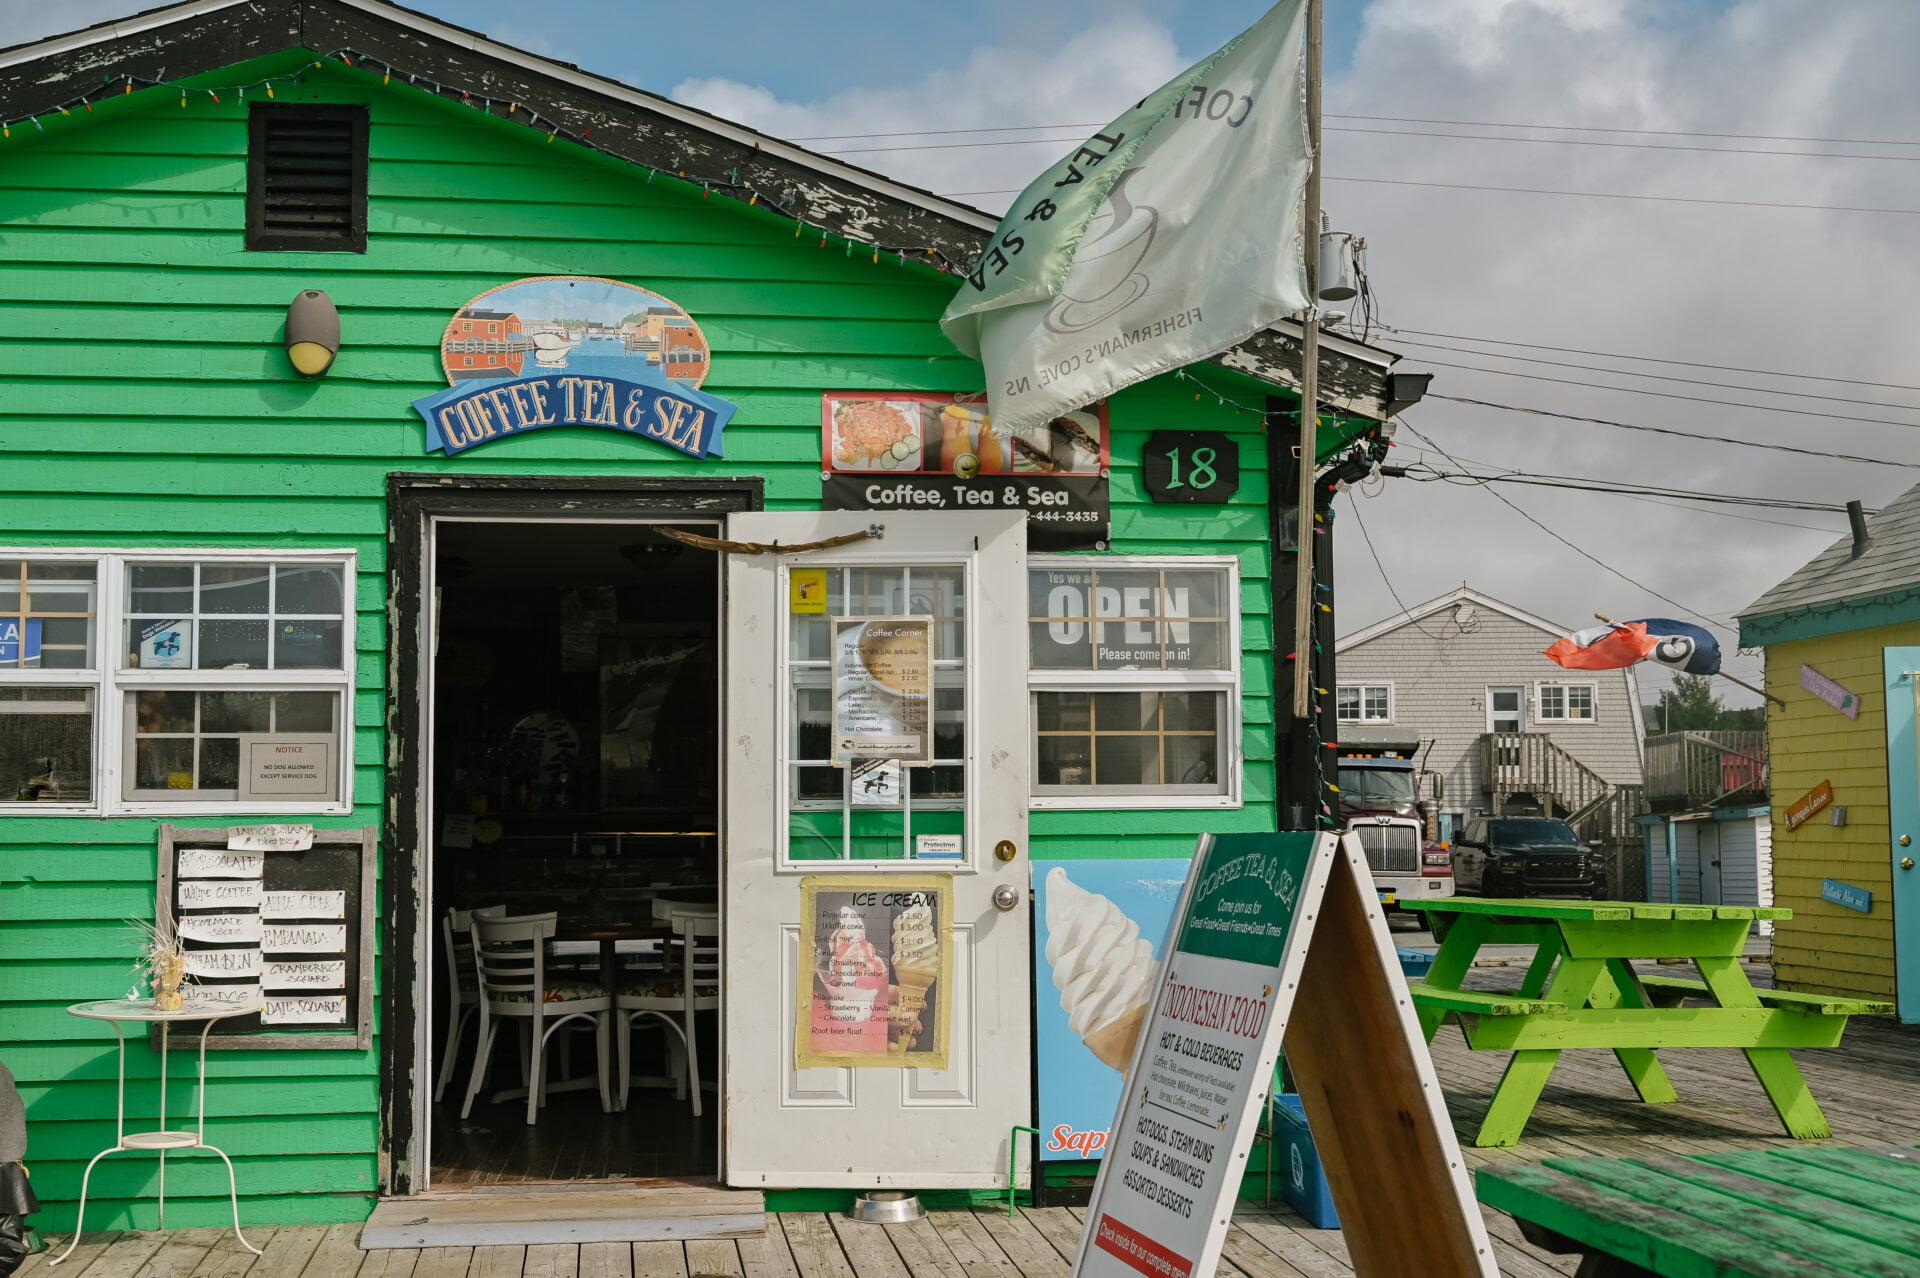 front entrance of the coffee, tea and sea cafe on the boardwalk of fisherman's cove nova scotia, it is bright green building